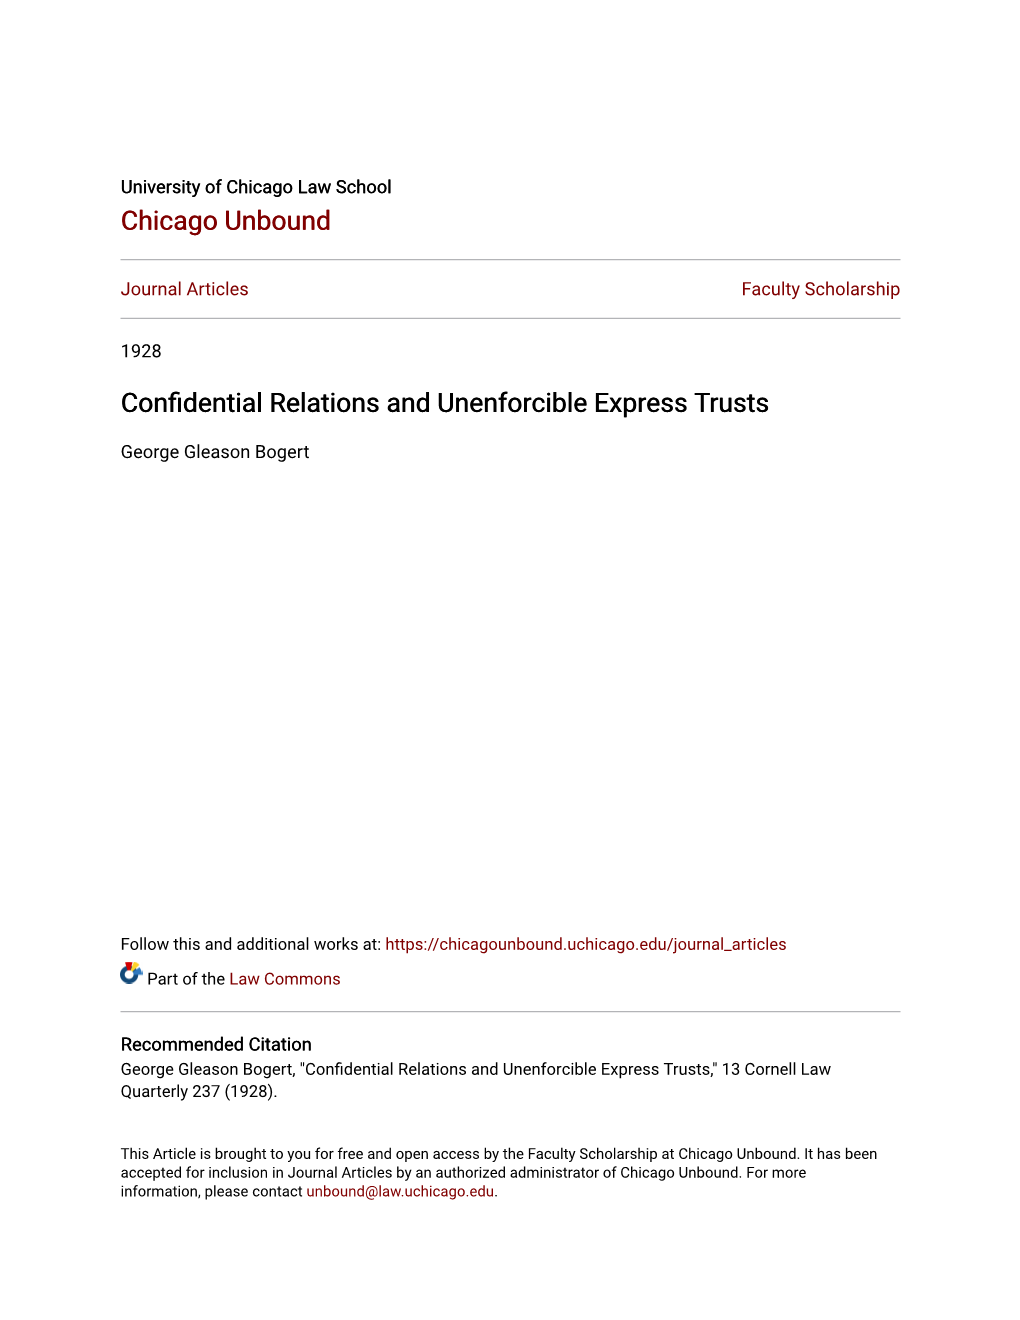 Confidential Relations and Unenforcible Express Trusts